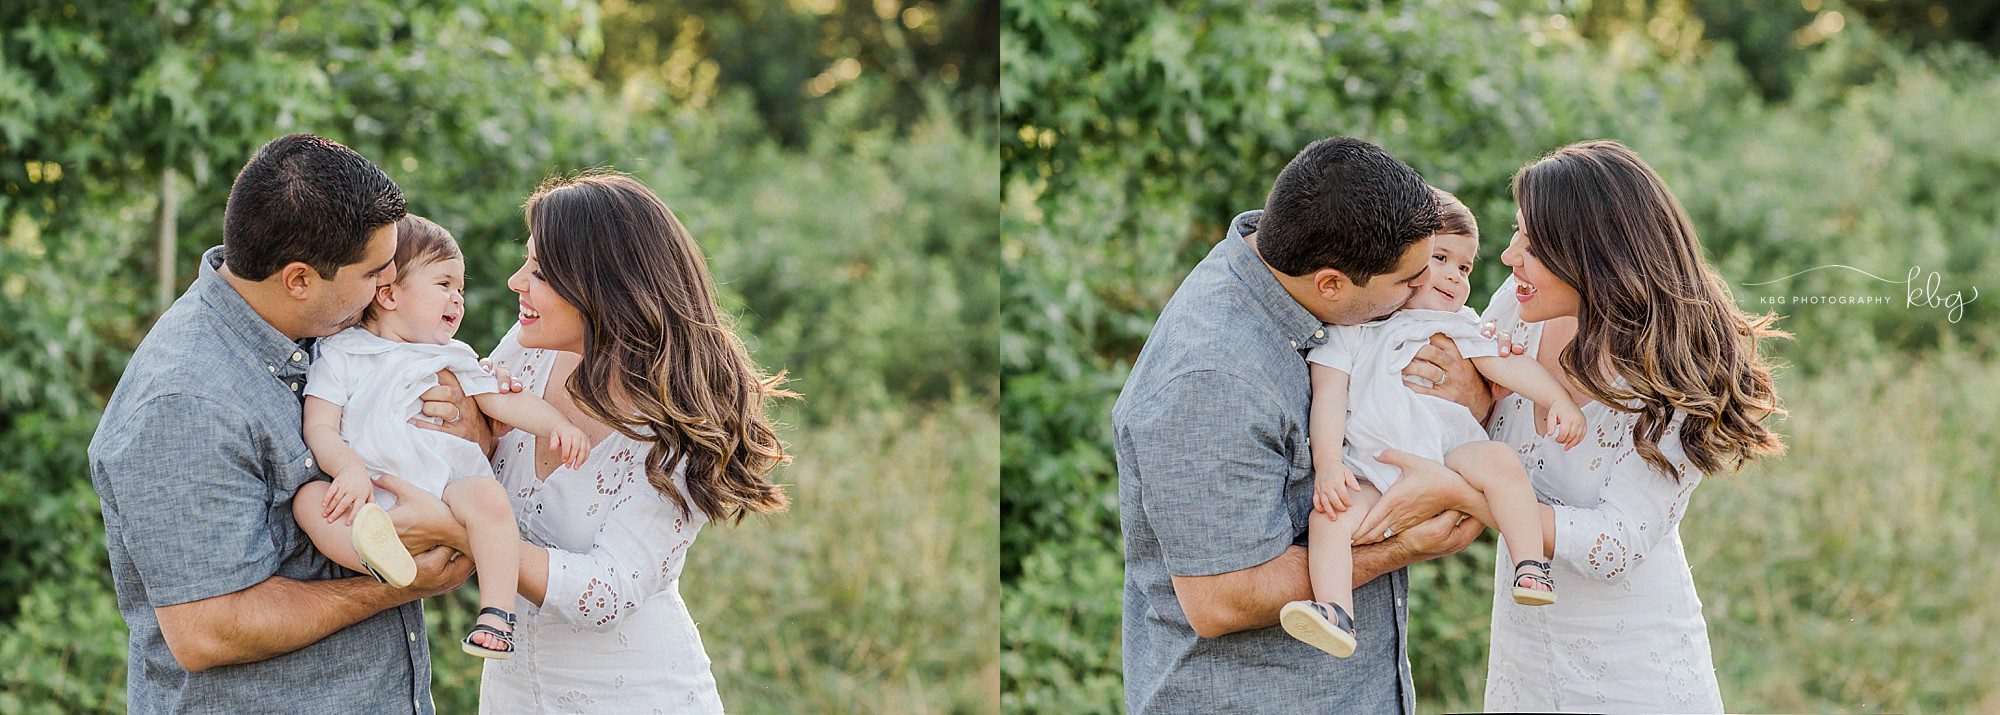 atlanta family photographer - mom and dad kissing baby in a field